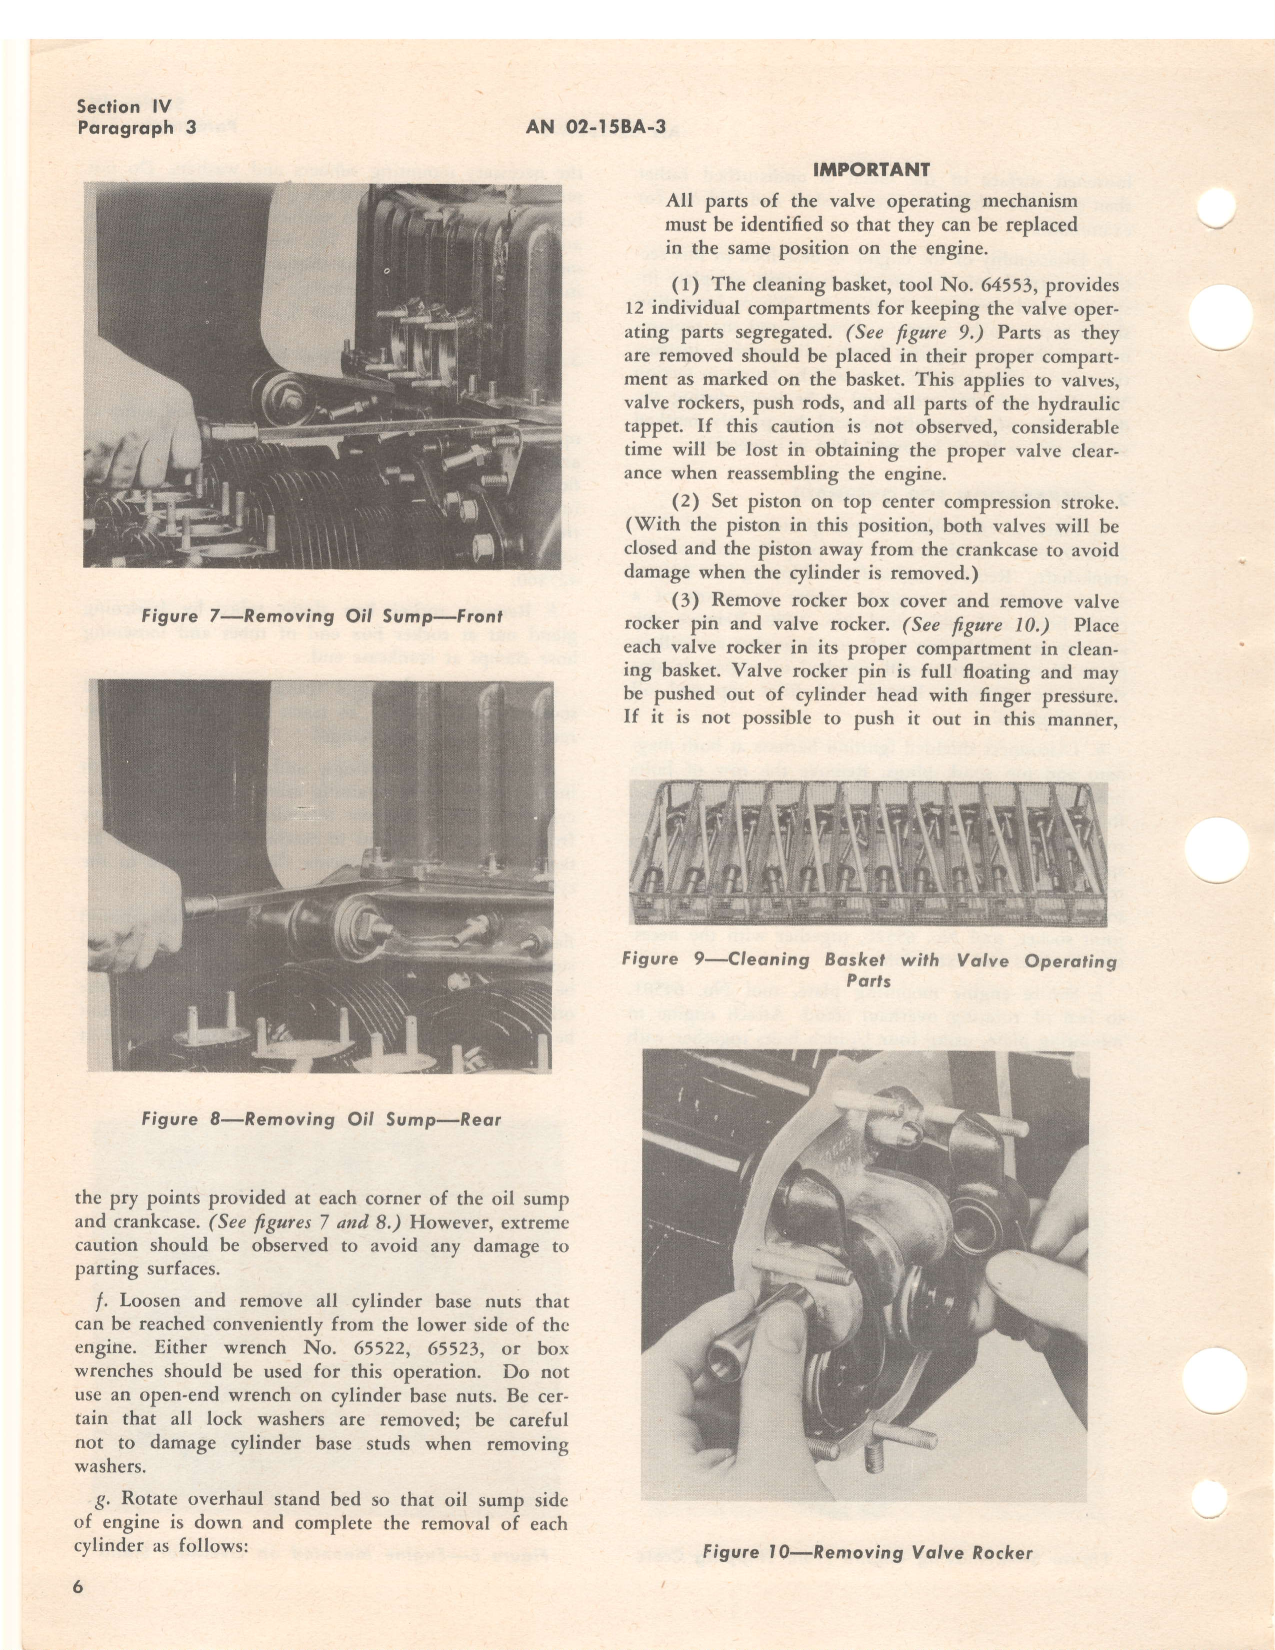 Sample page 12 from AirCorps Library document: Overhaul Instructions - O-435-1 Engines - 1951